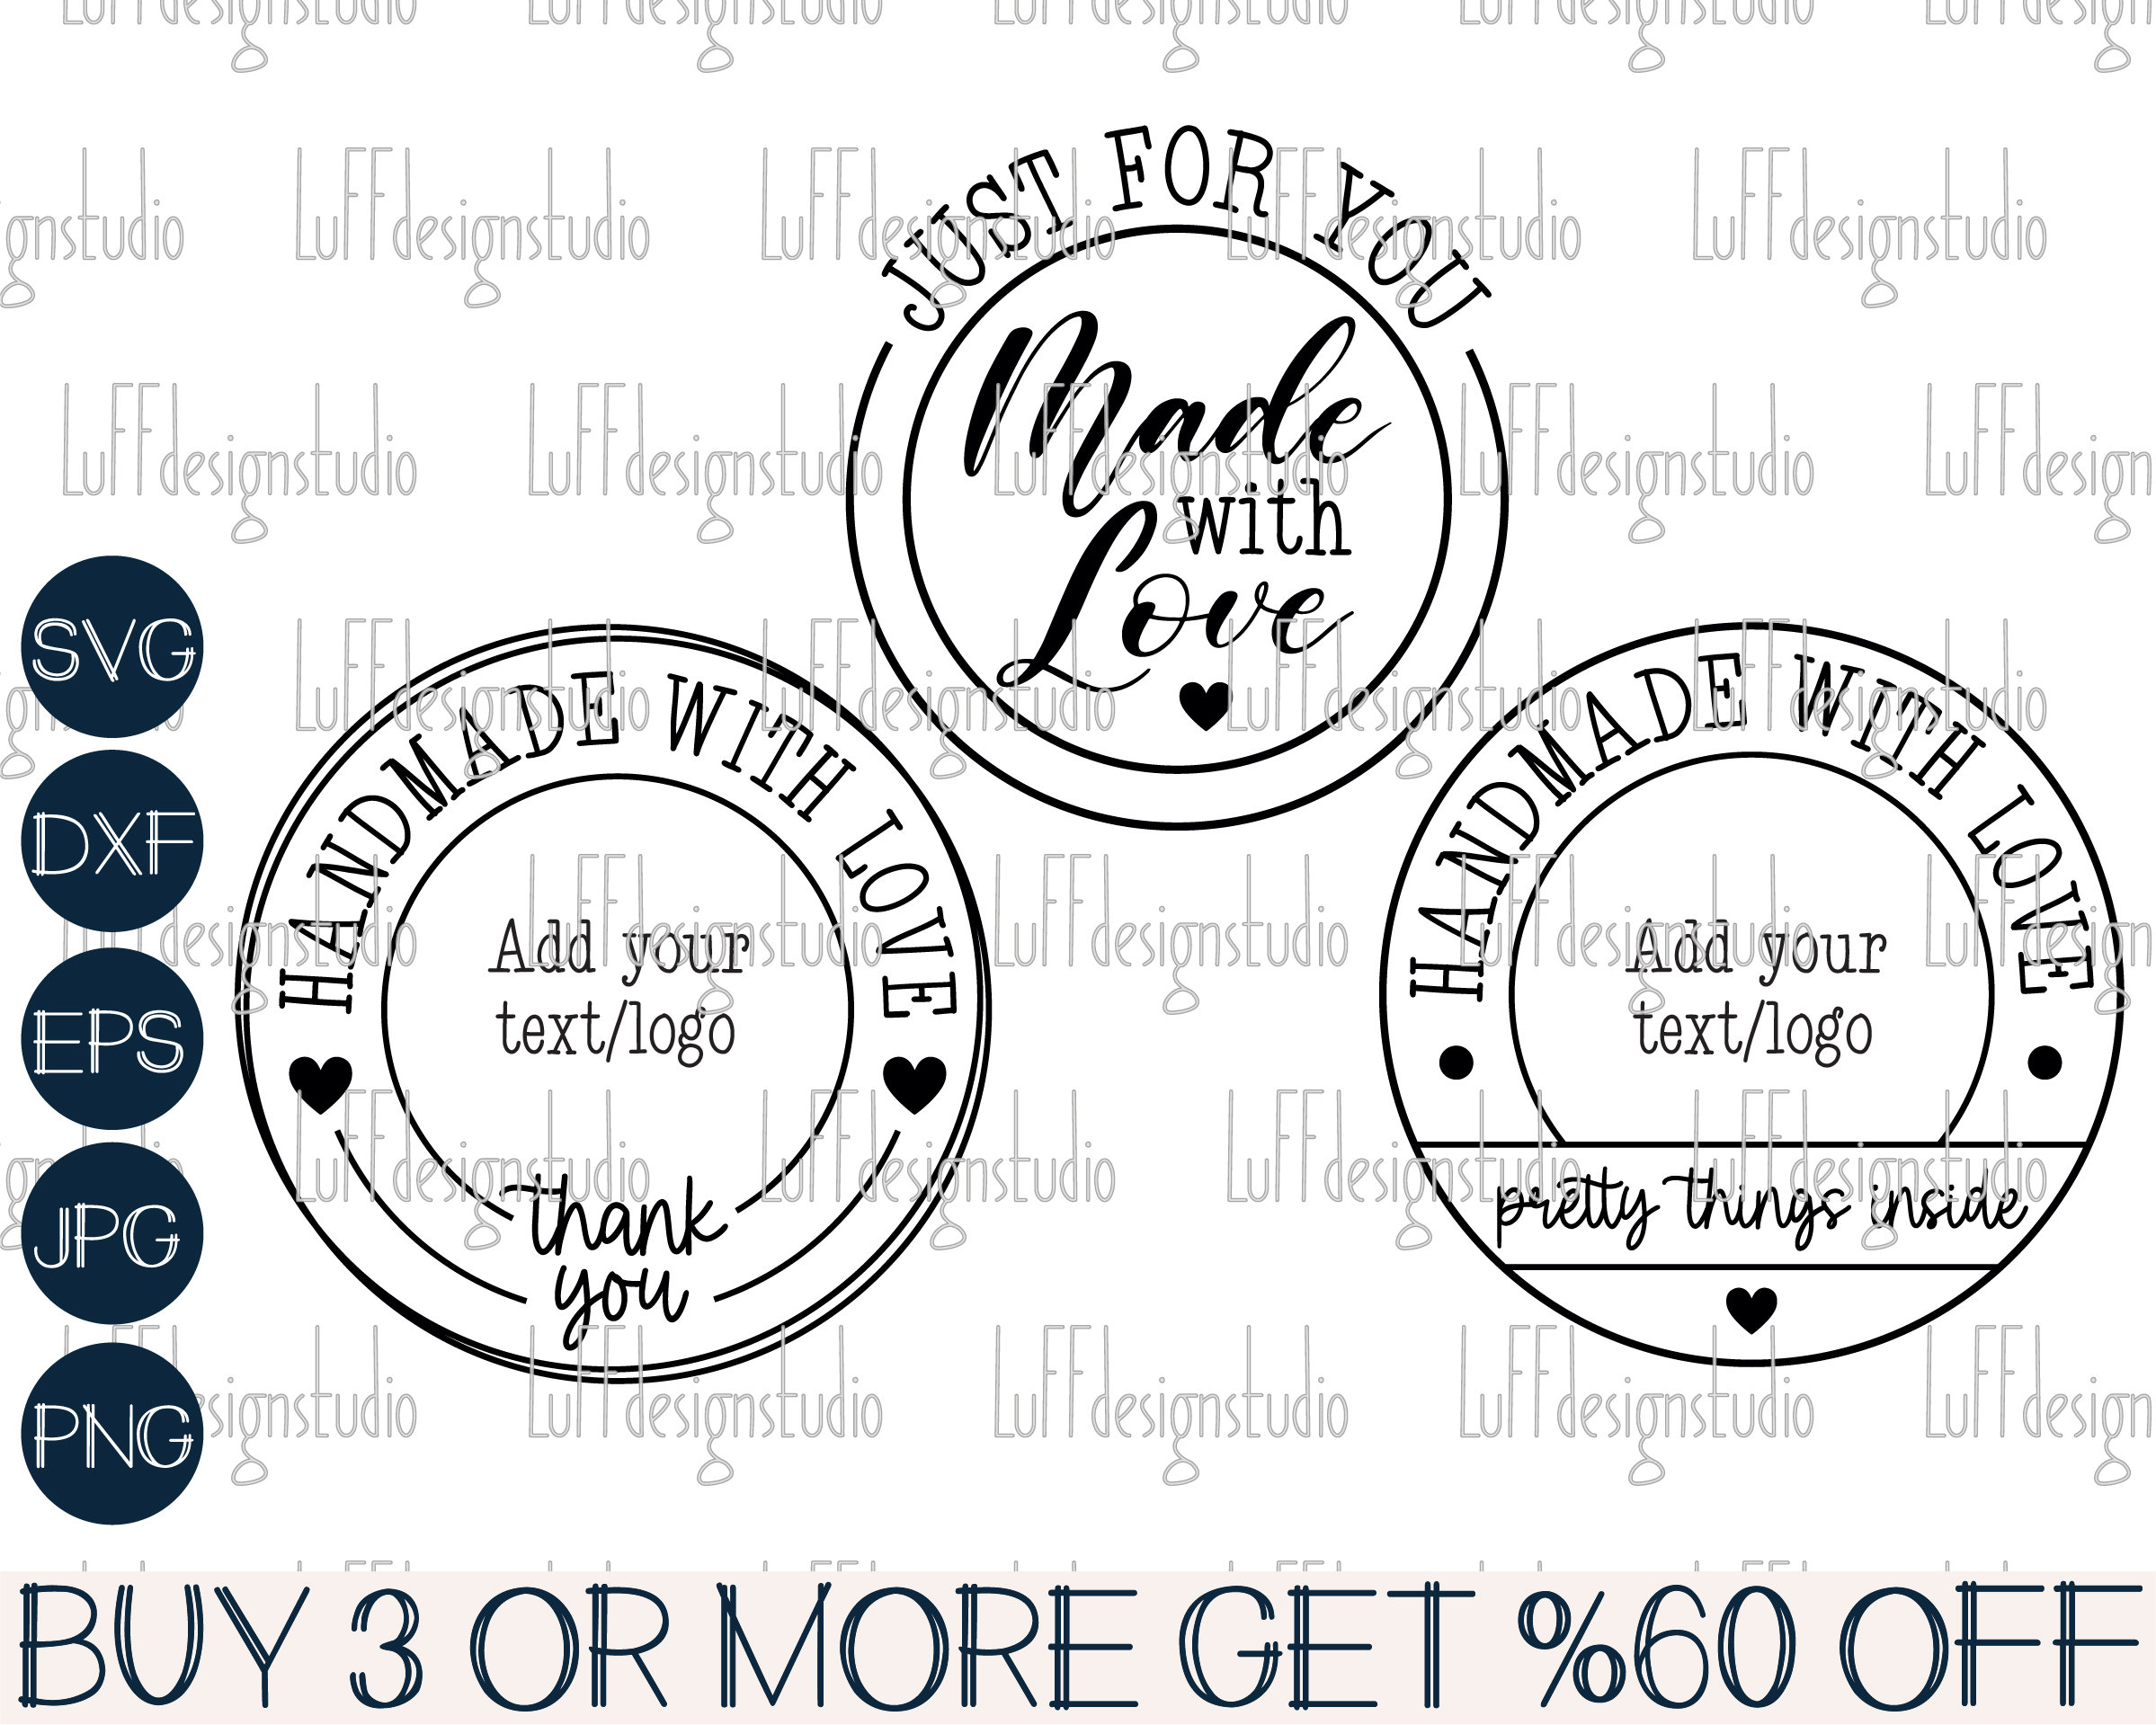 Printable Handmade With Love Gift Tags, Digital Download Gift Tags PDF,  Print Your Own Handmade Gift Tags 